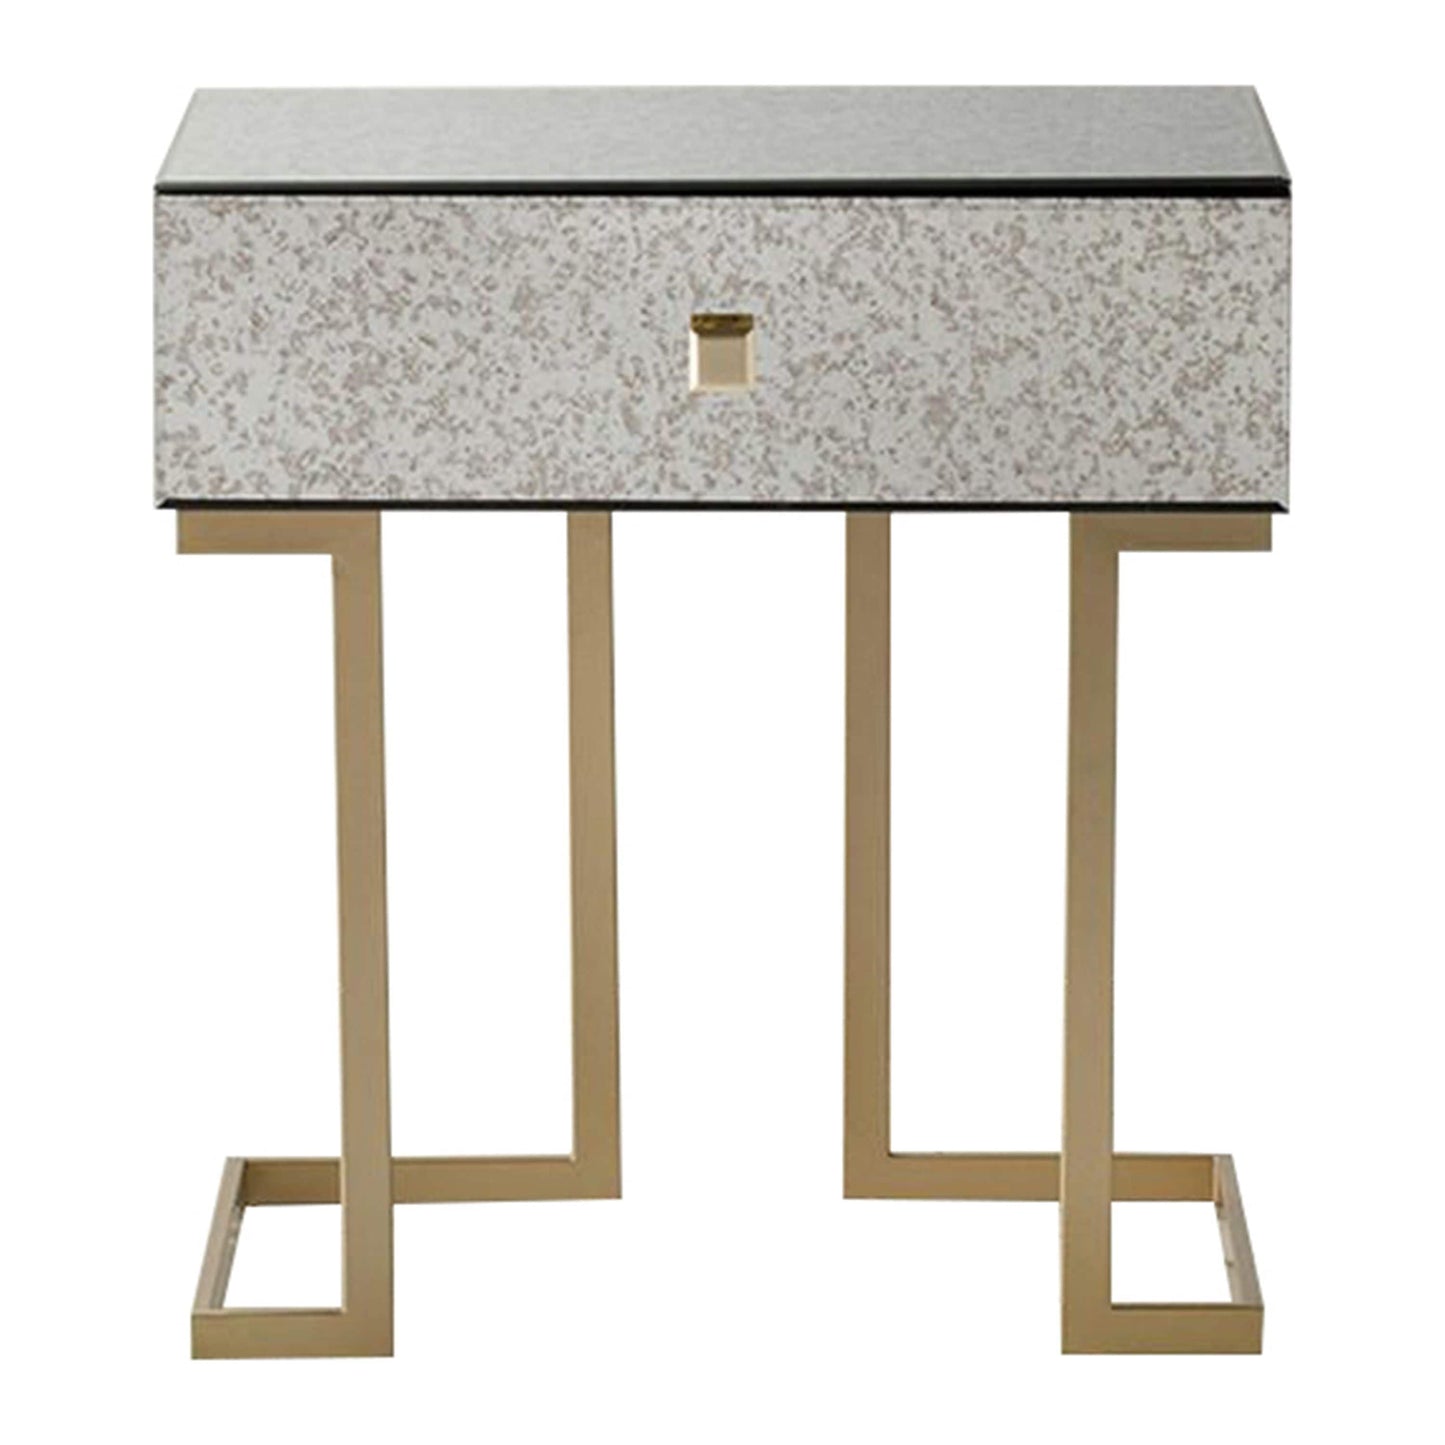 Amberley 1 Drawer Side Table